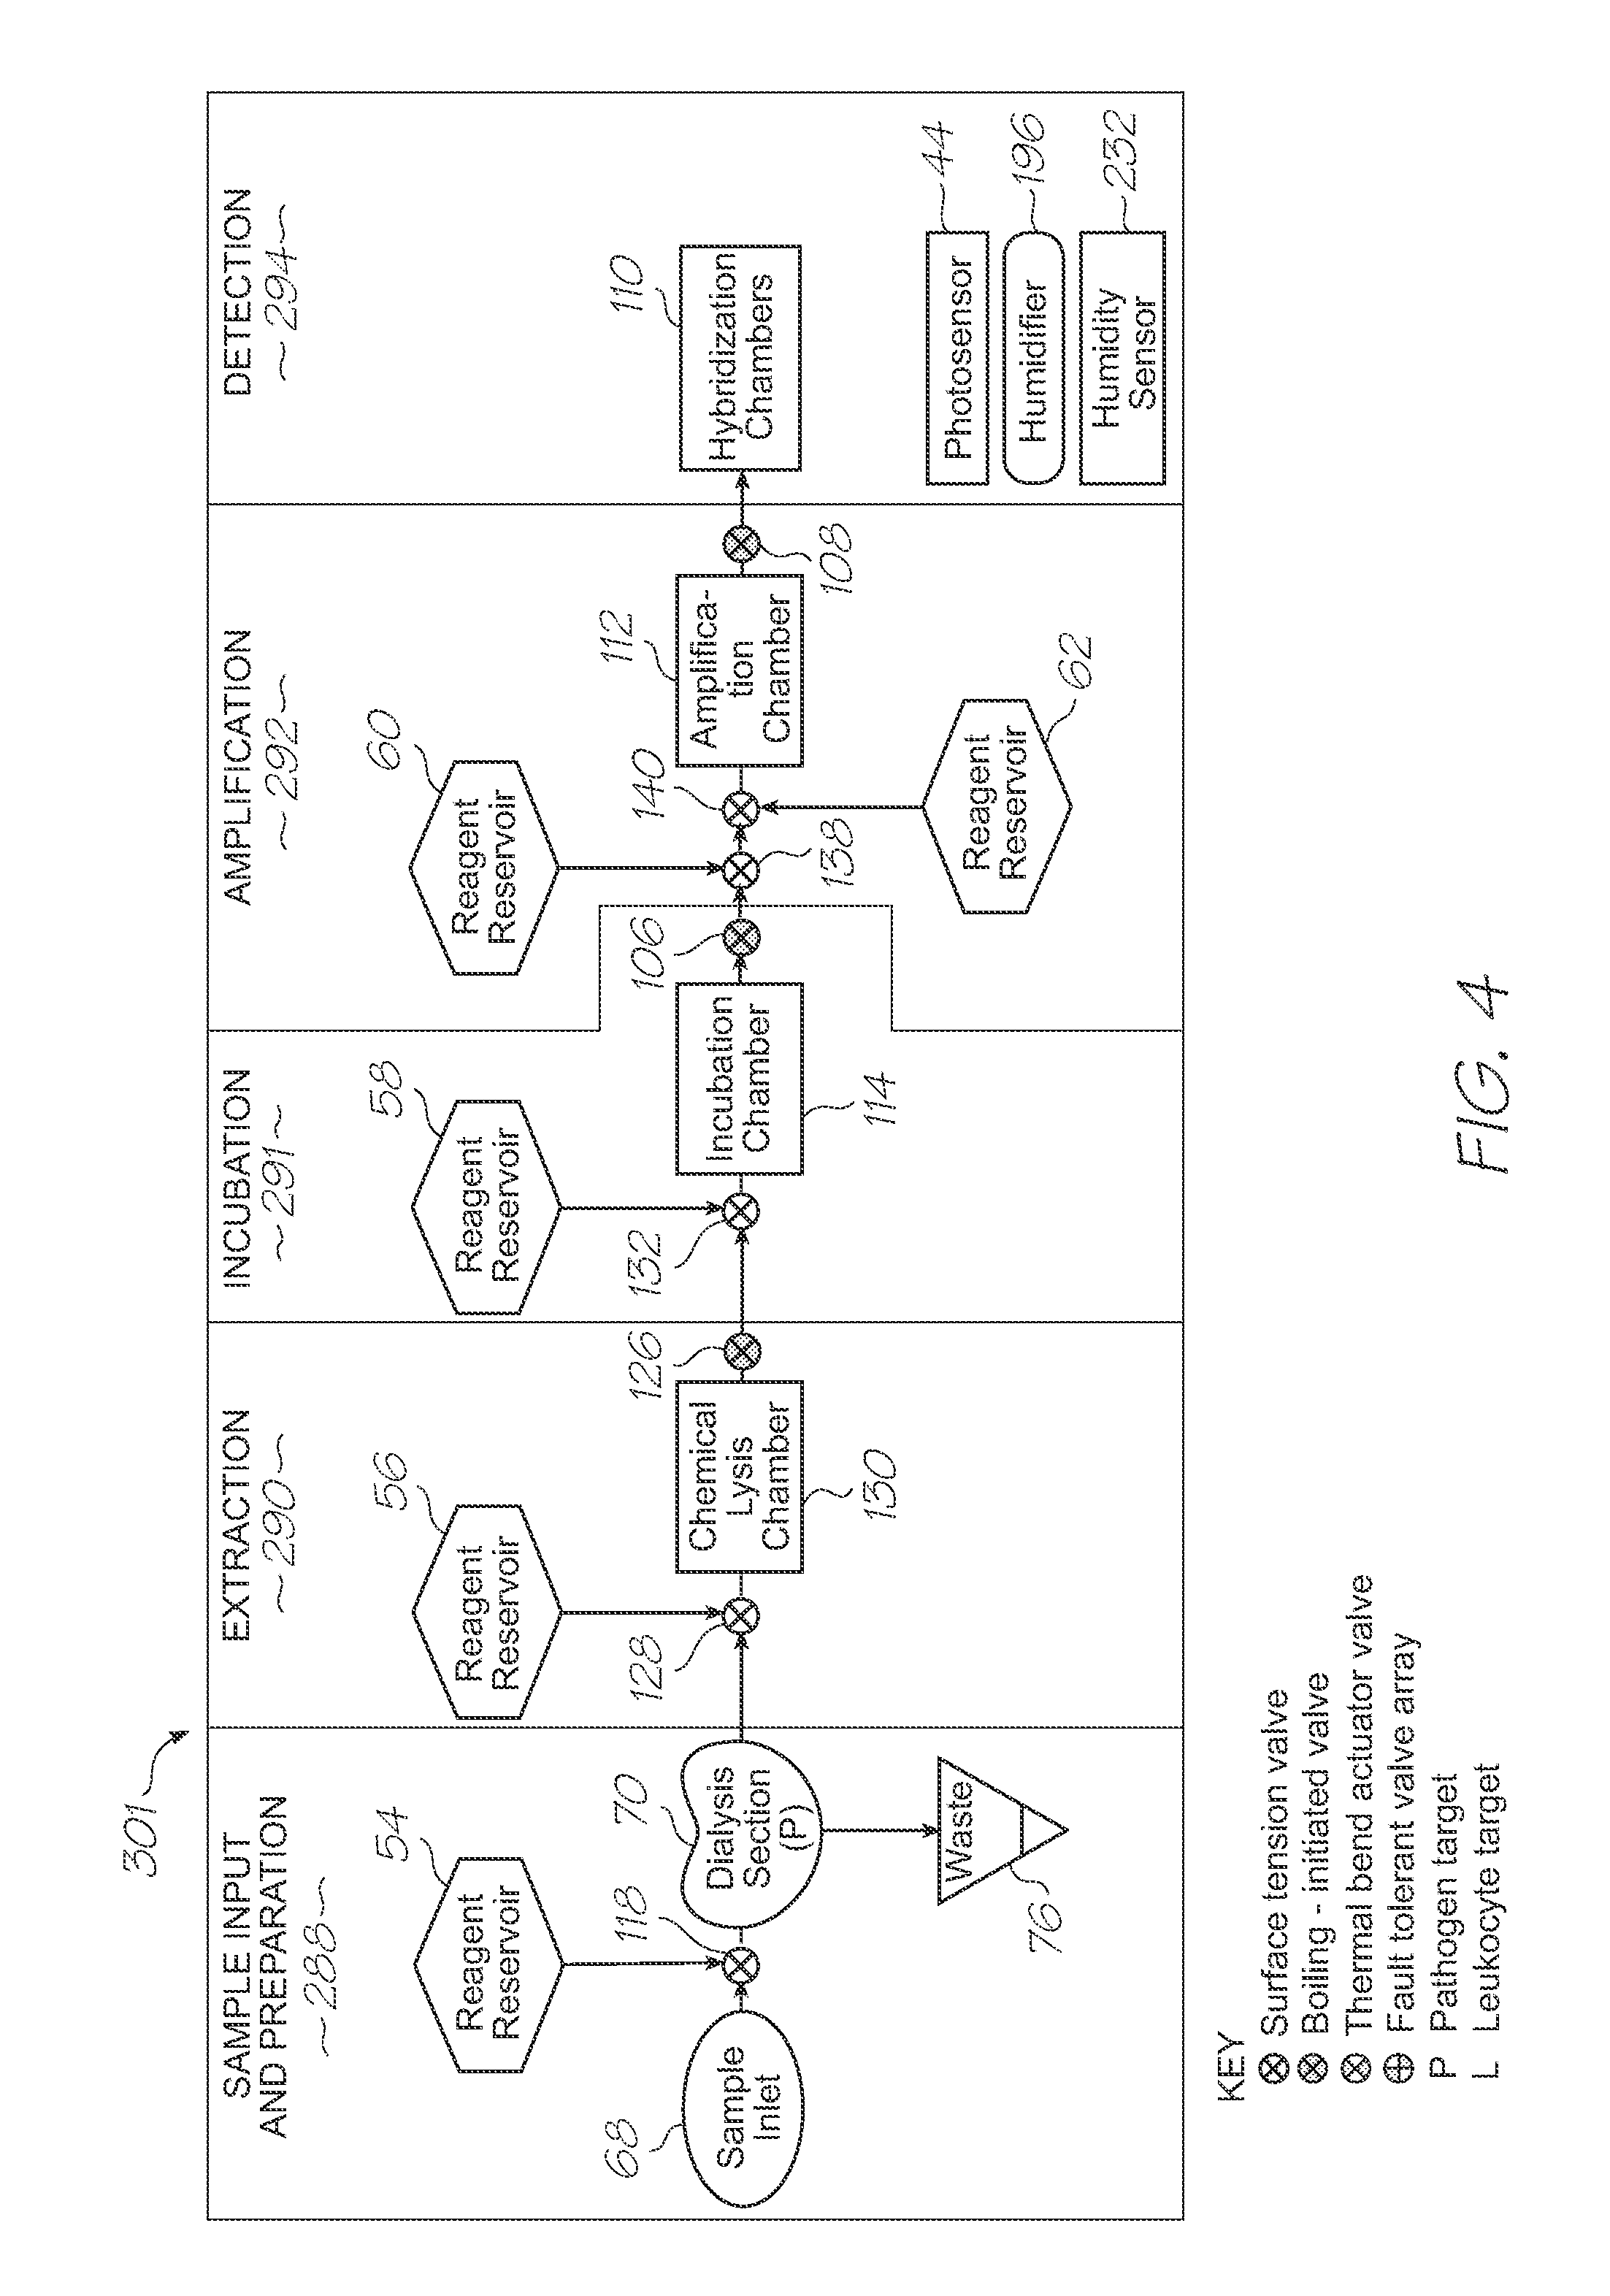 Loc device for amplifying and detecting target nucleic acid sequences using electrochemiluminescent resonant energy transfer, linear probes with covalently attached primers